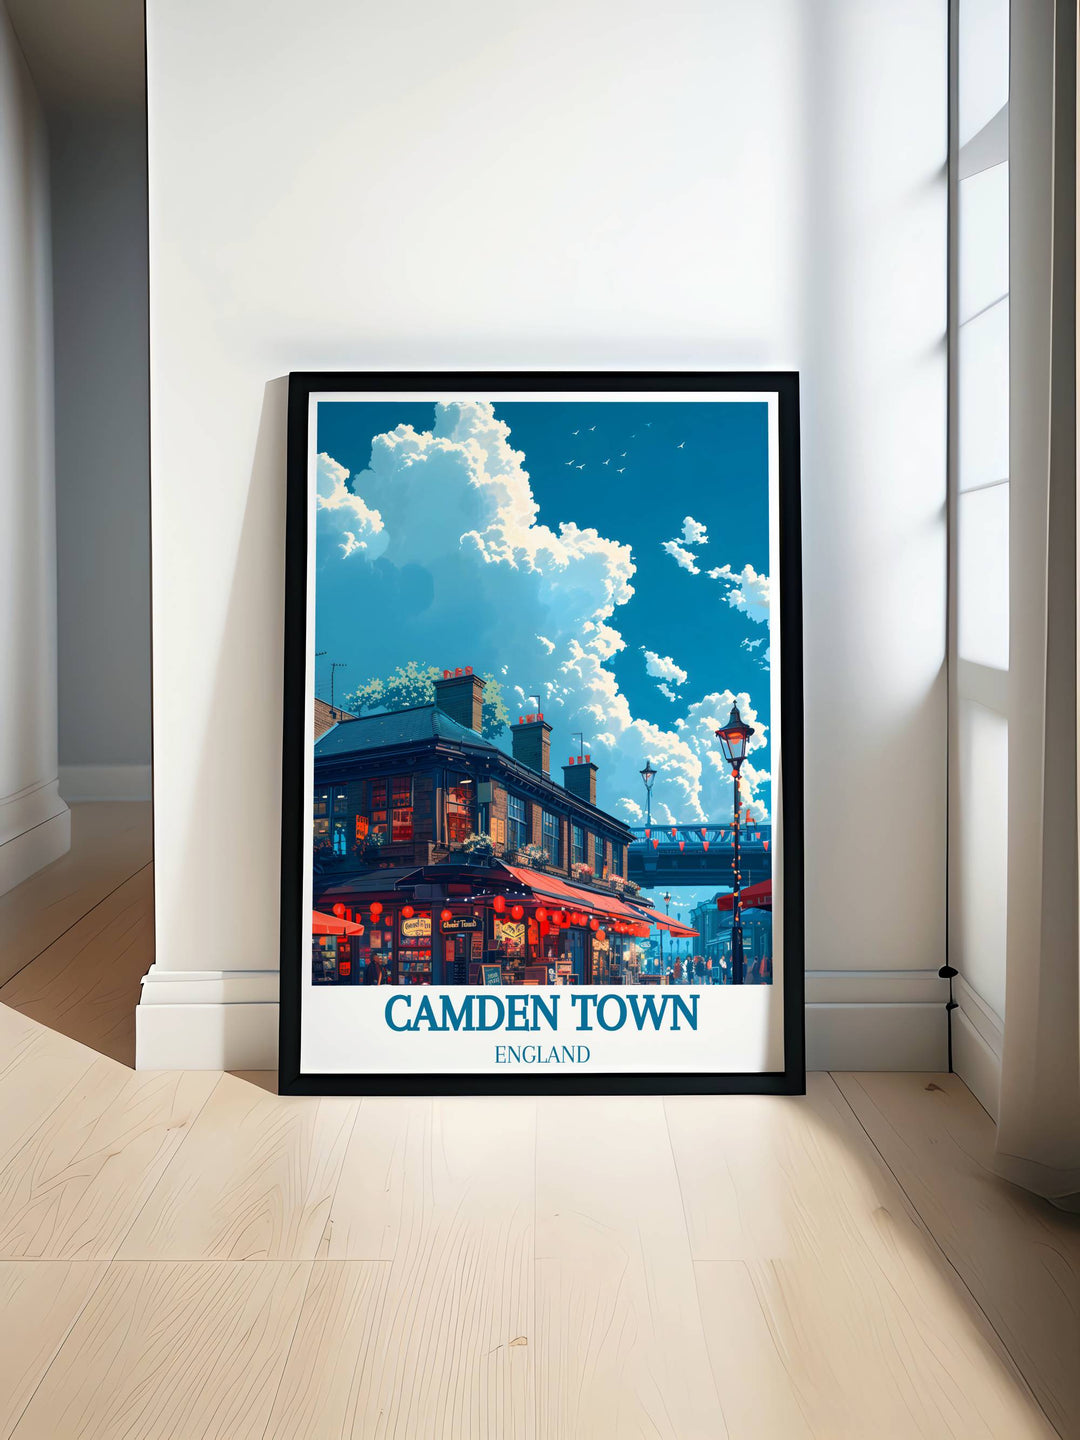 Beautiful Camden Market print capturing the vibrant energy of Camden Town London with its iconic market street art and famous Camden Lock Bridge perfect for adding a touch of London to your home decor or as a unique gift for travel enthusiasts and art lovers.